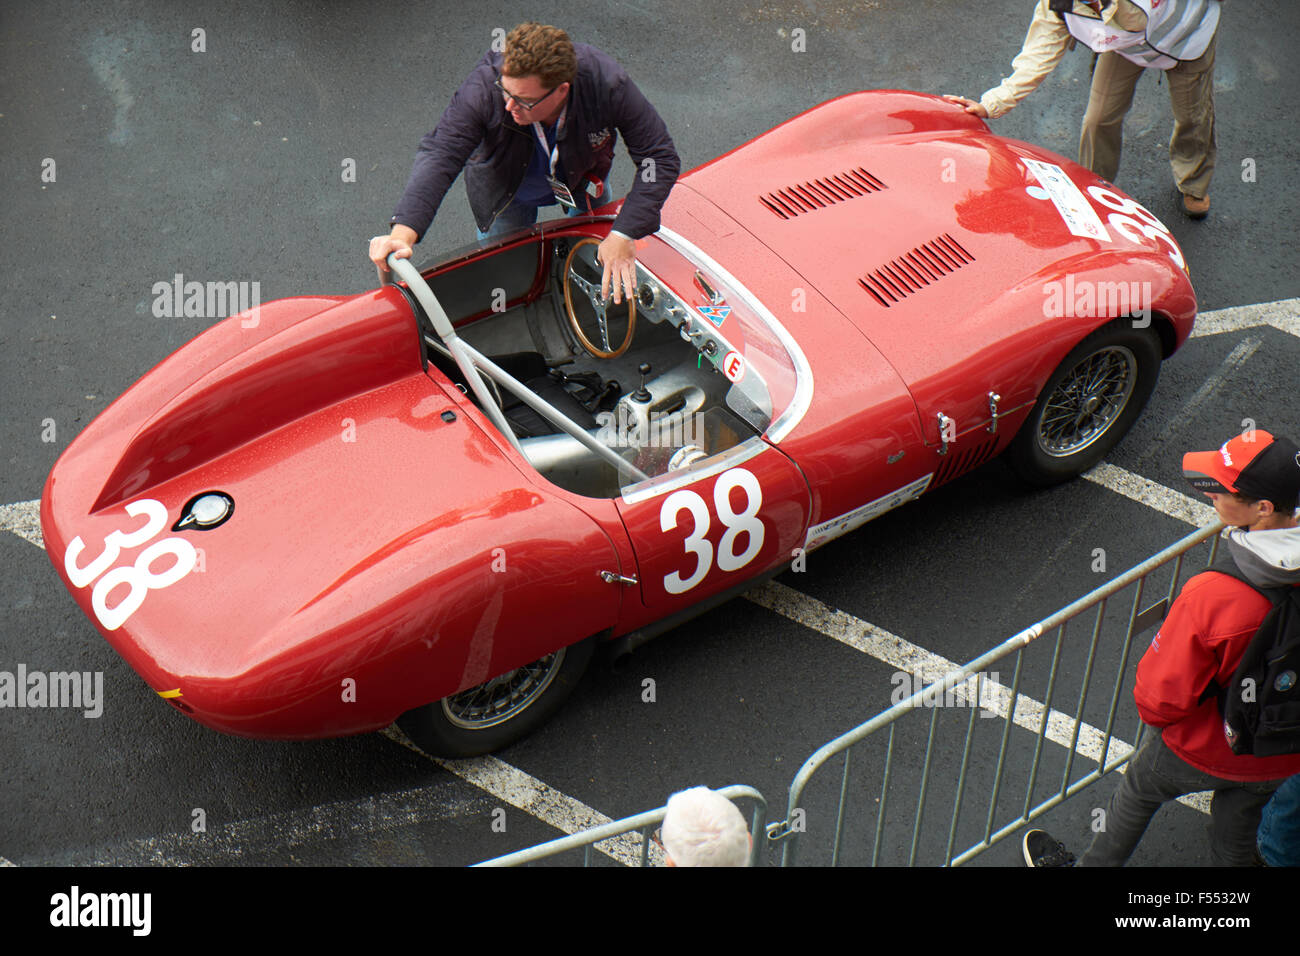 Car S O S High Resolution Stock Photography and Images - Alamy